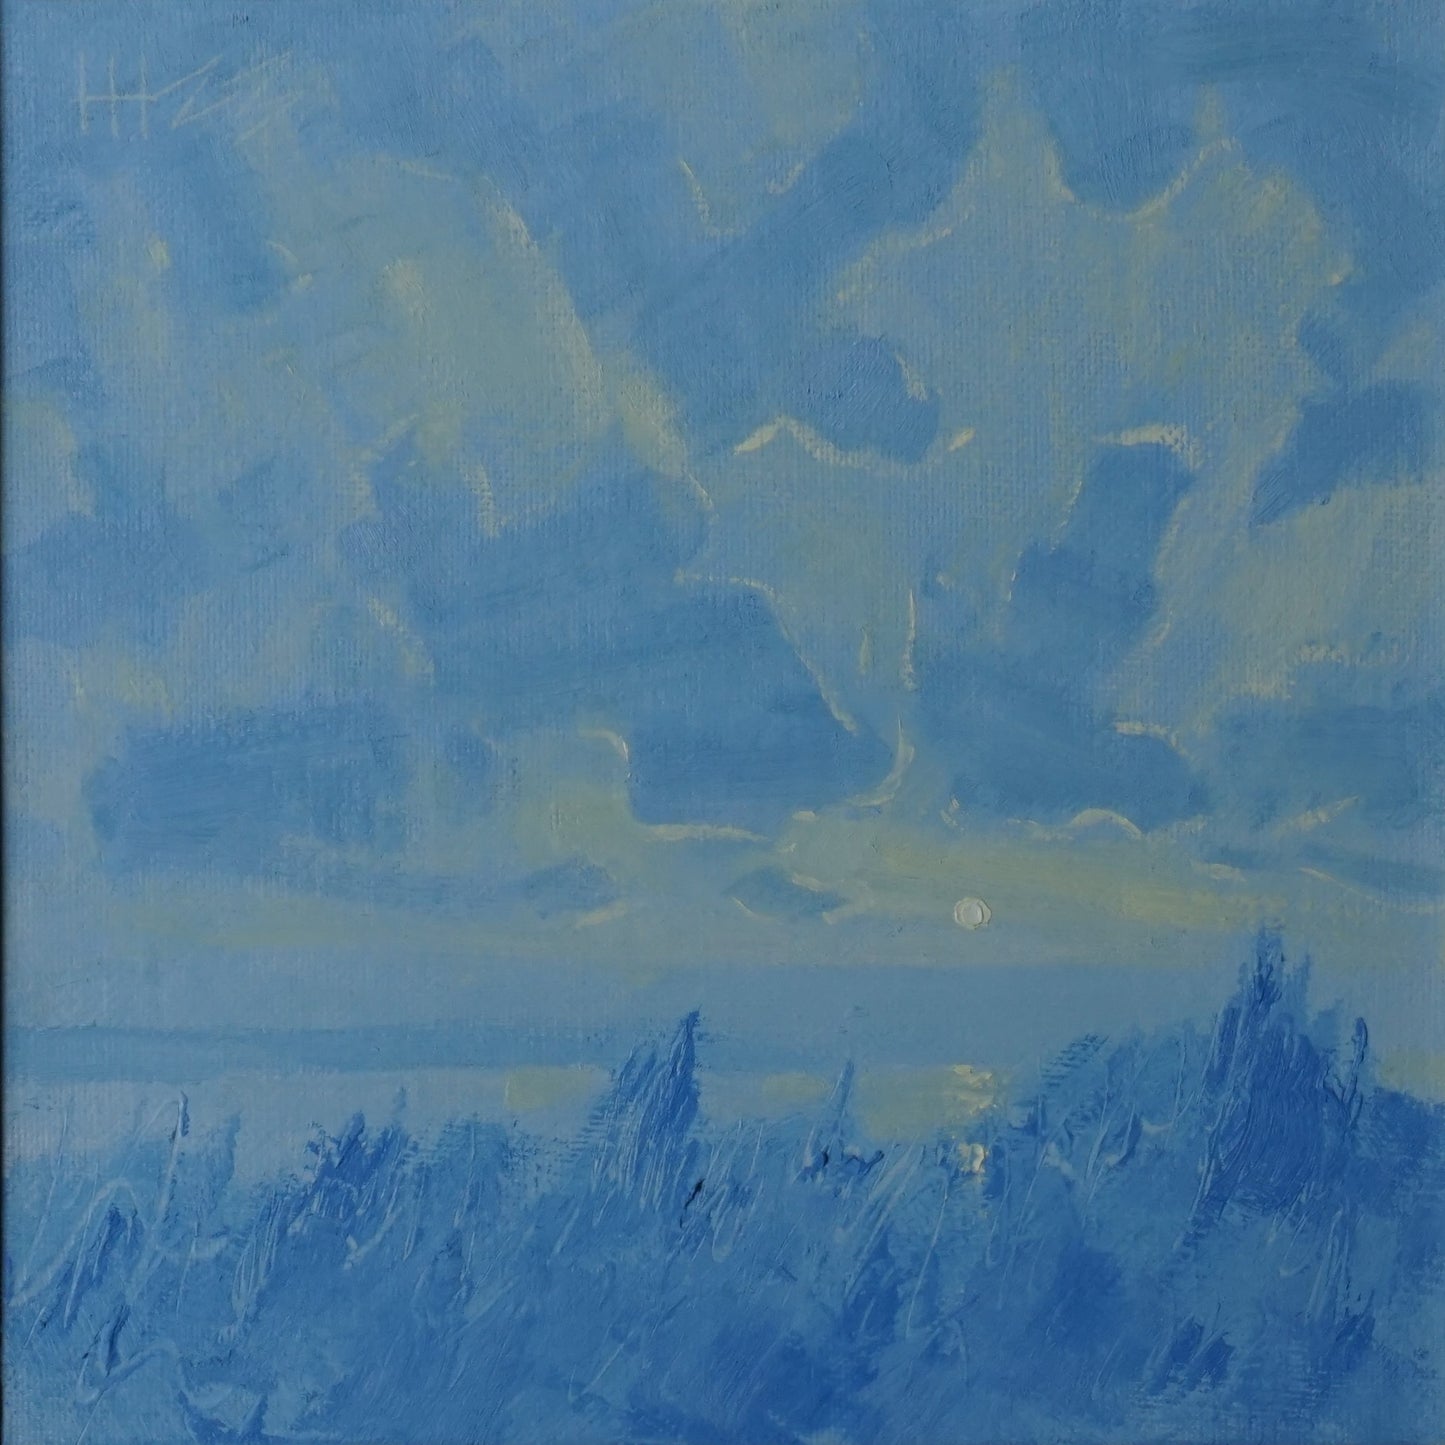 Beyond- 20x20cm / Oil painting on canvas panel